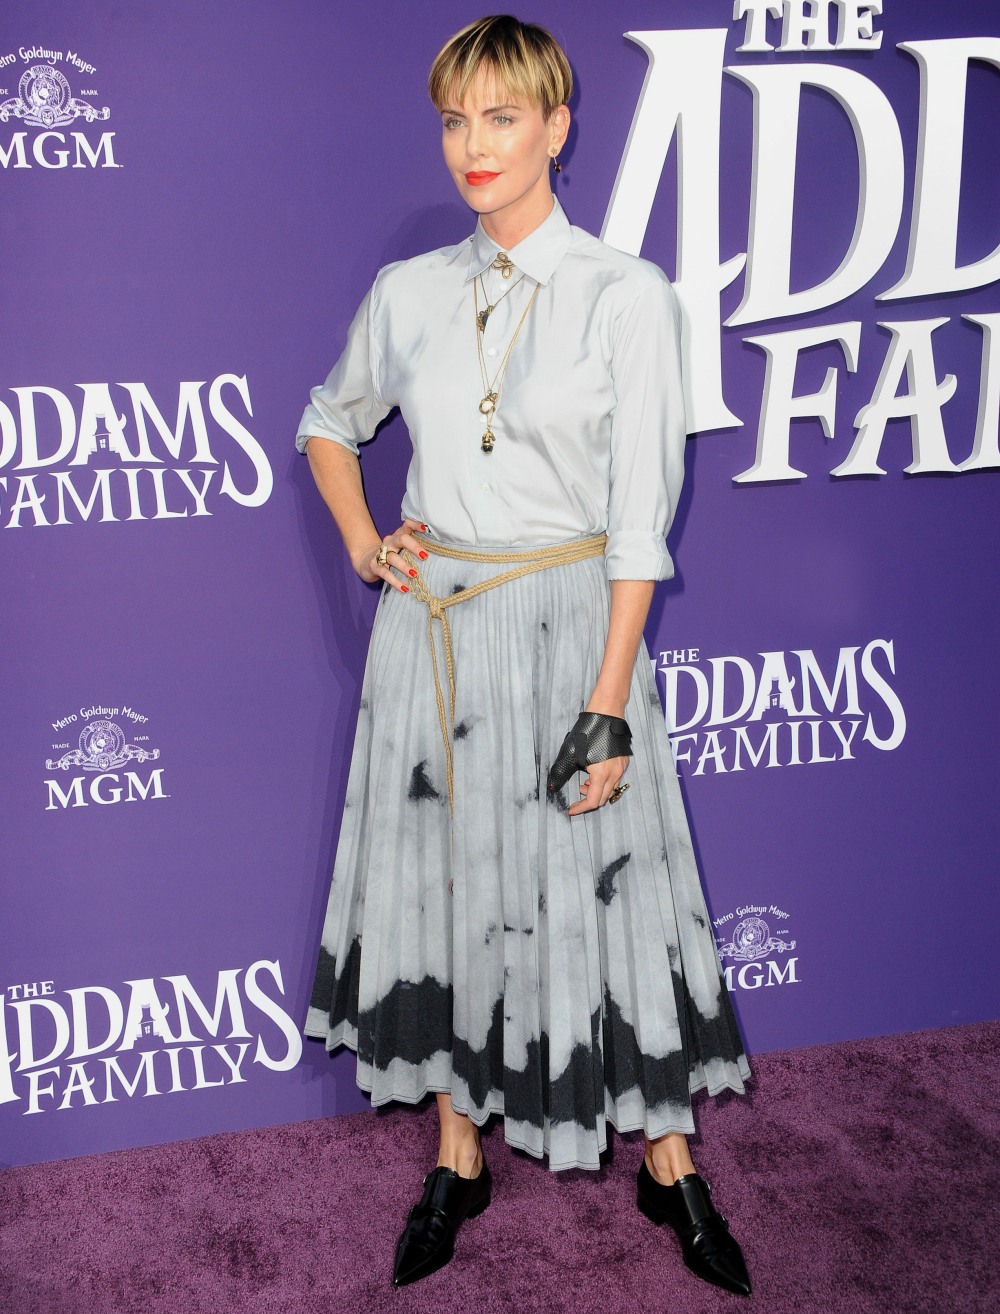 Charlize Theron at the Los Angeles premiere of 'The Addams Family' held at the Century City AMC in Century City, USA on October 6, 2019.